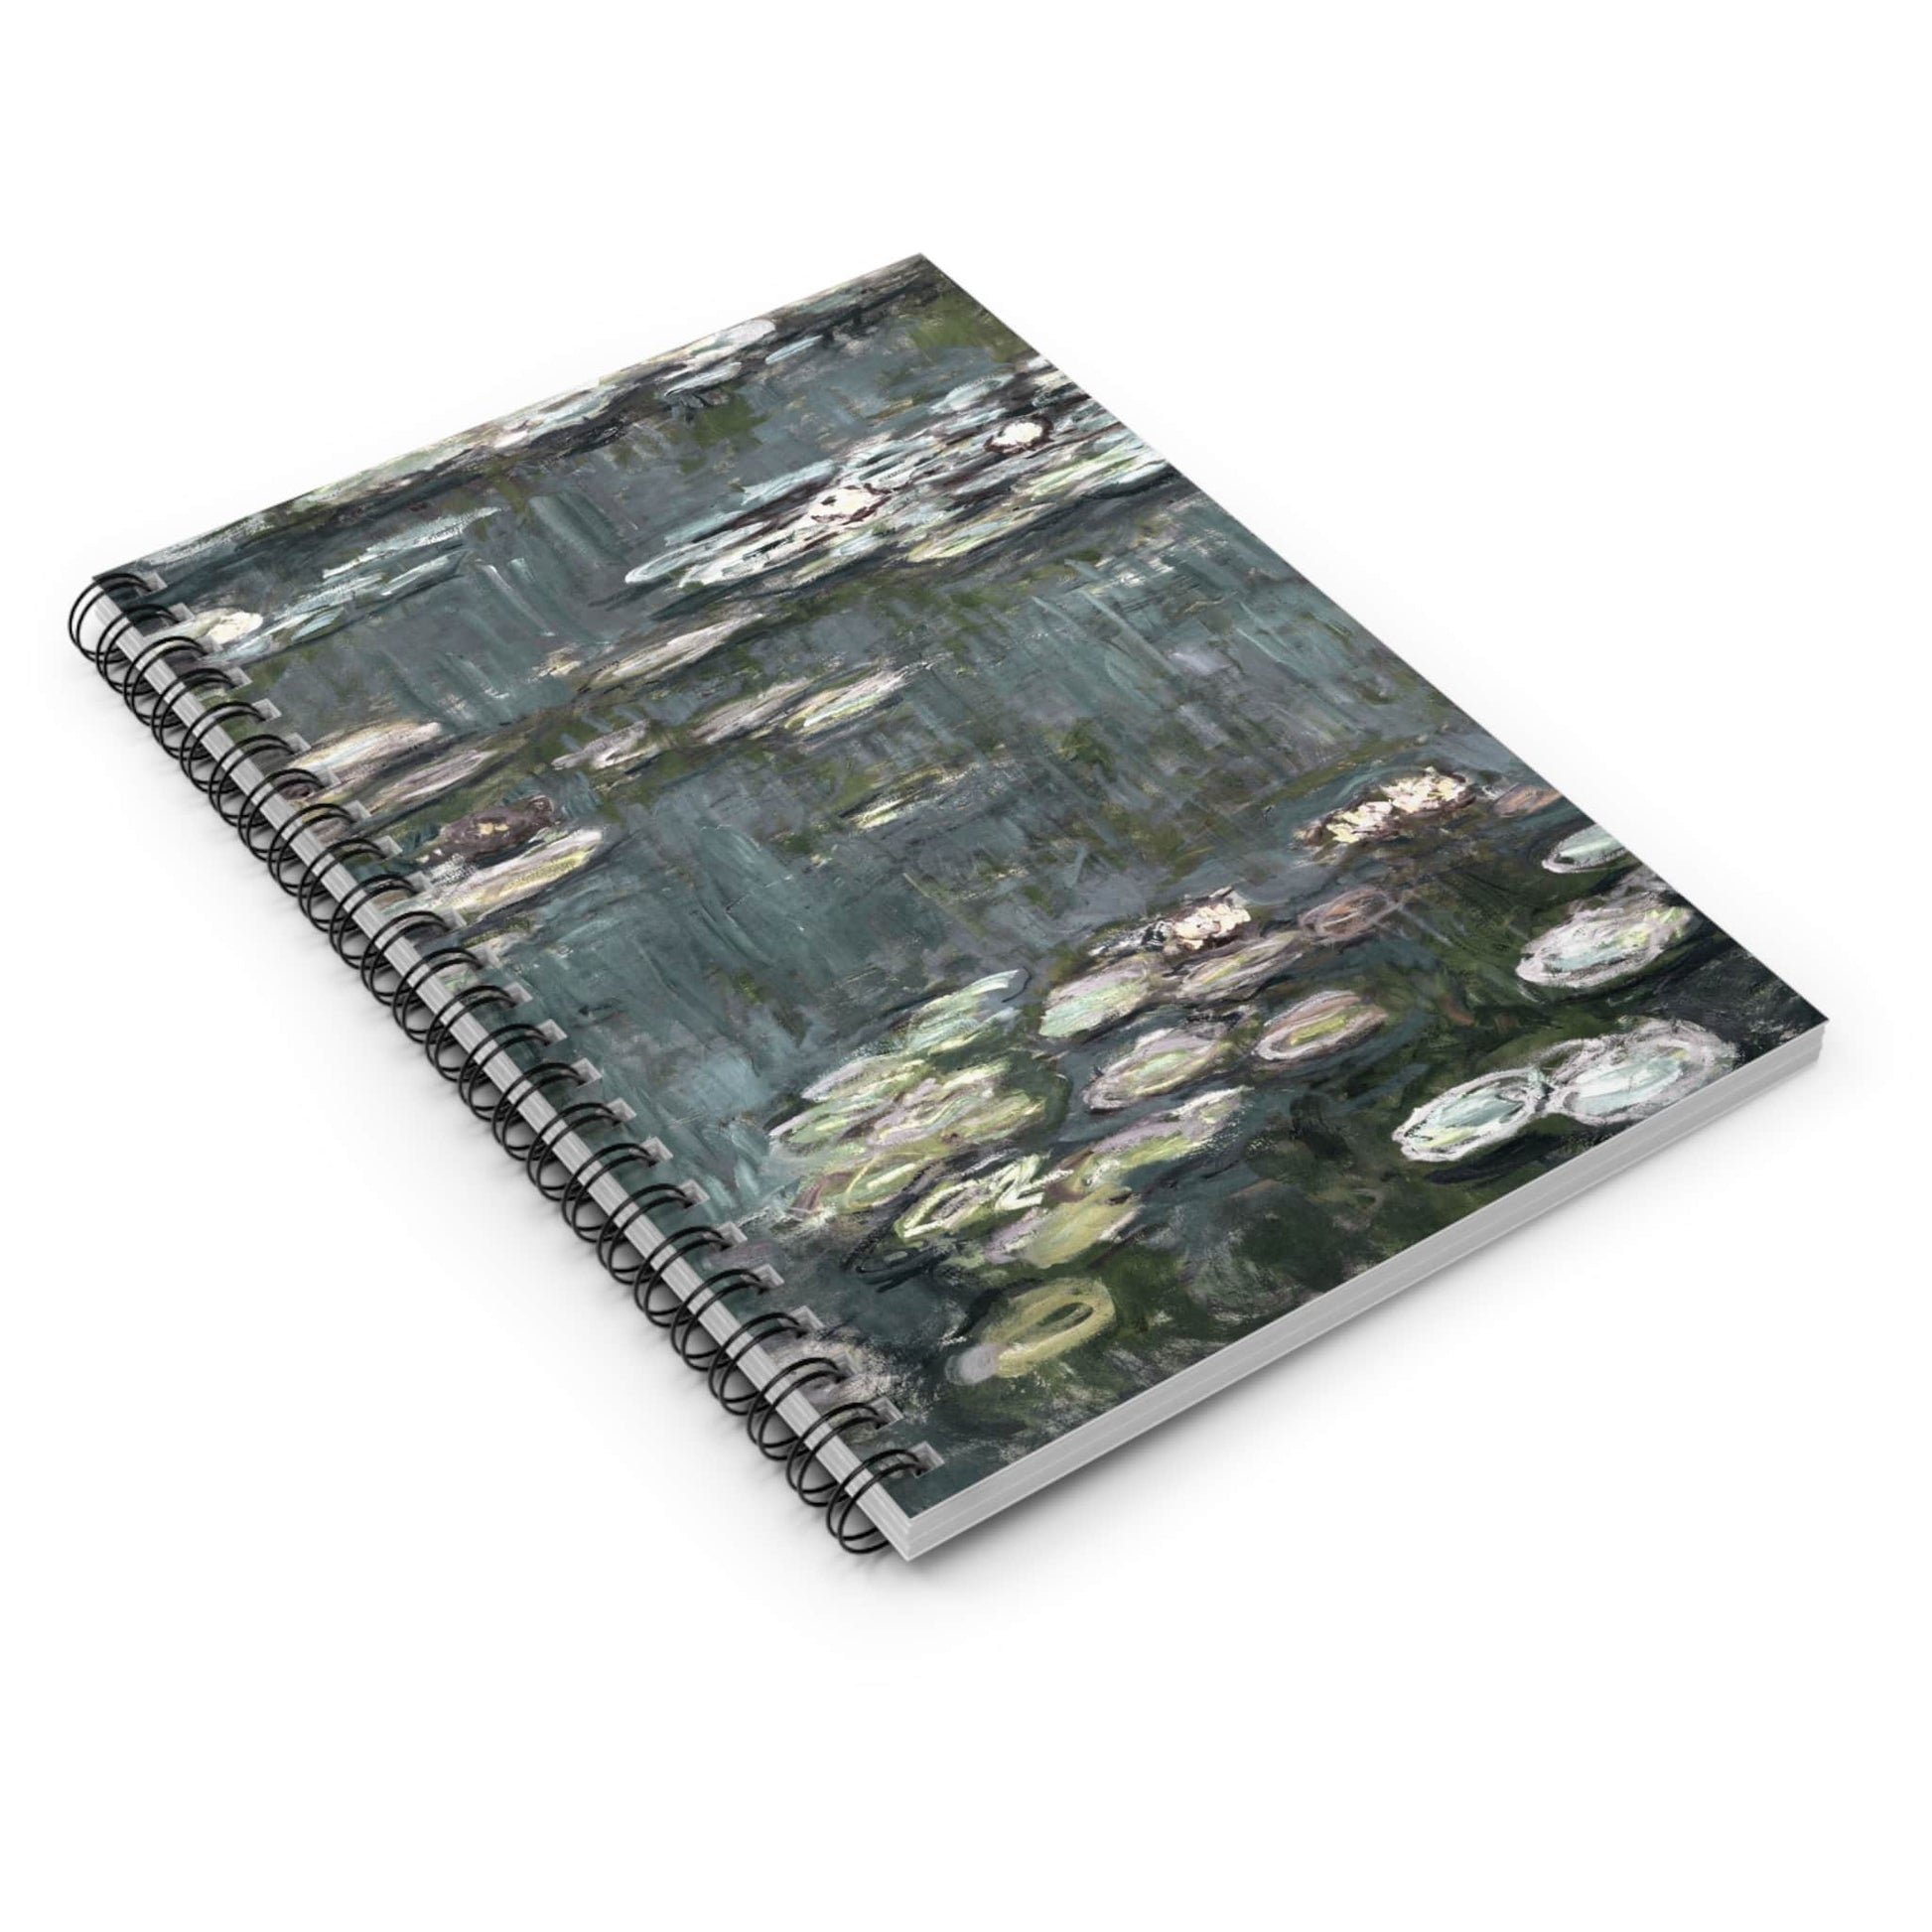 Relaxing Water Painting Spiral Notebook Laying Flat on White Surface